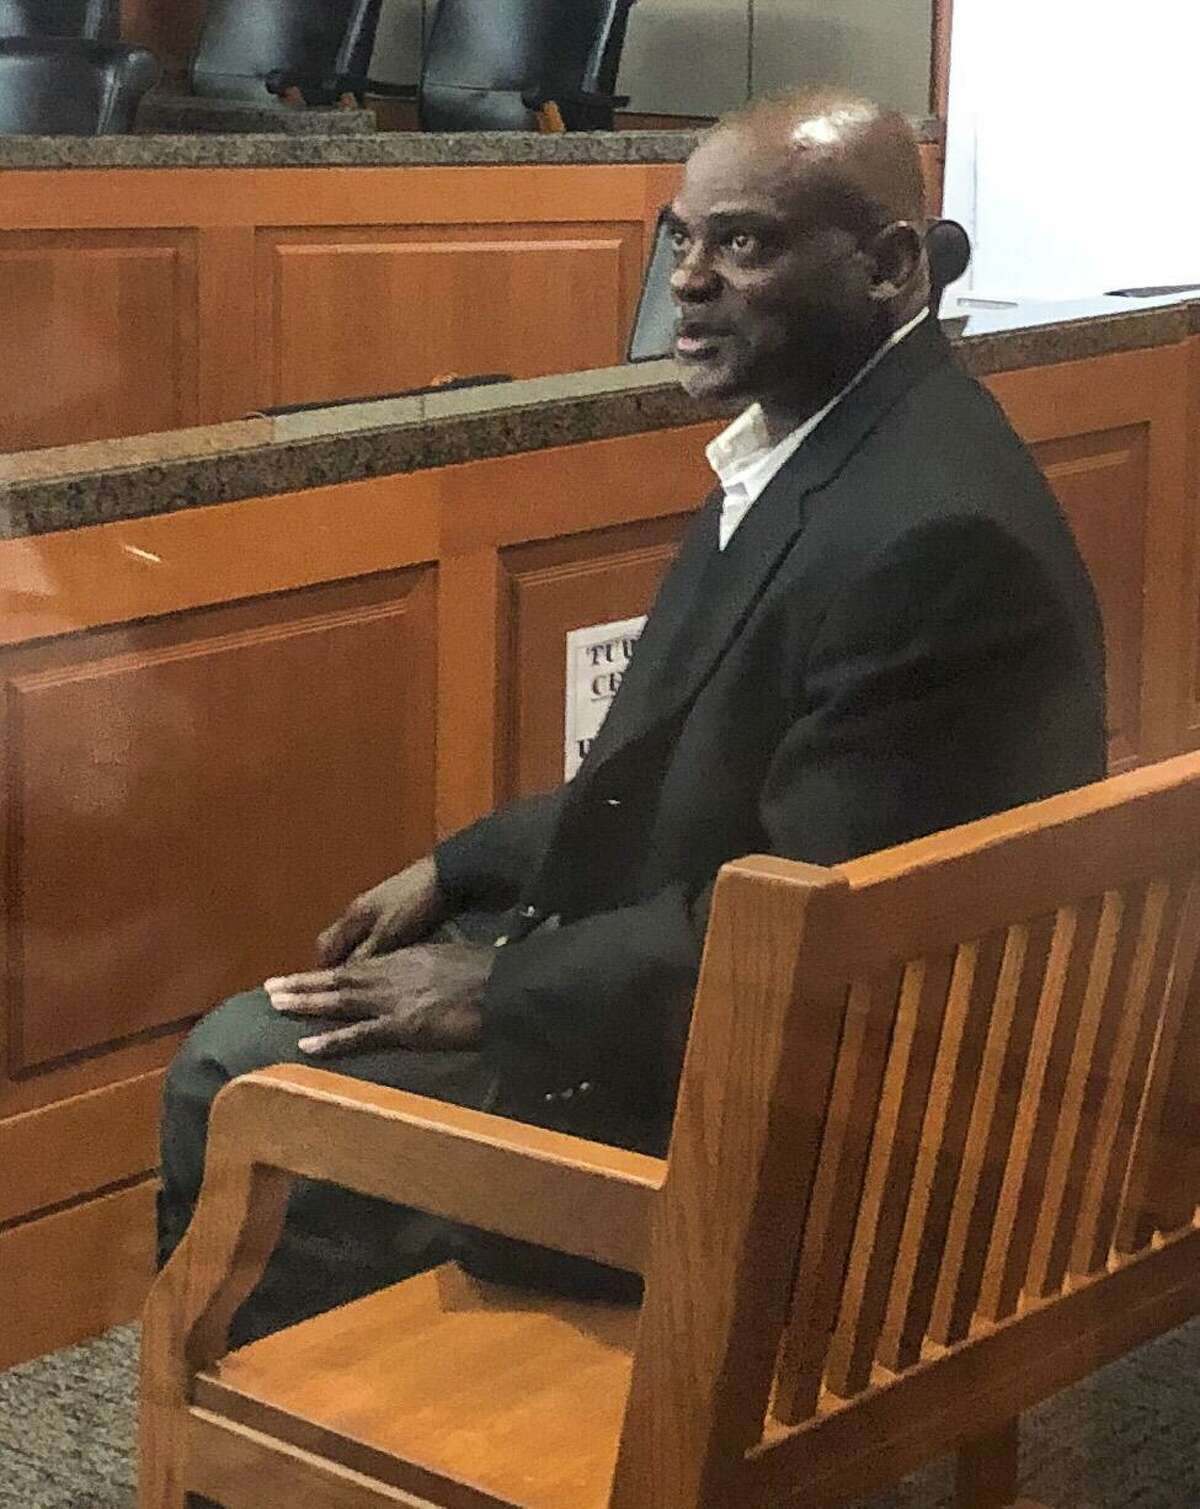 Former HPD officer Gerald Goines in court before turning himself in, August 23, 2019, in Houston. He was involved in the botched drug raid.